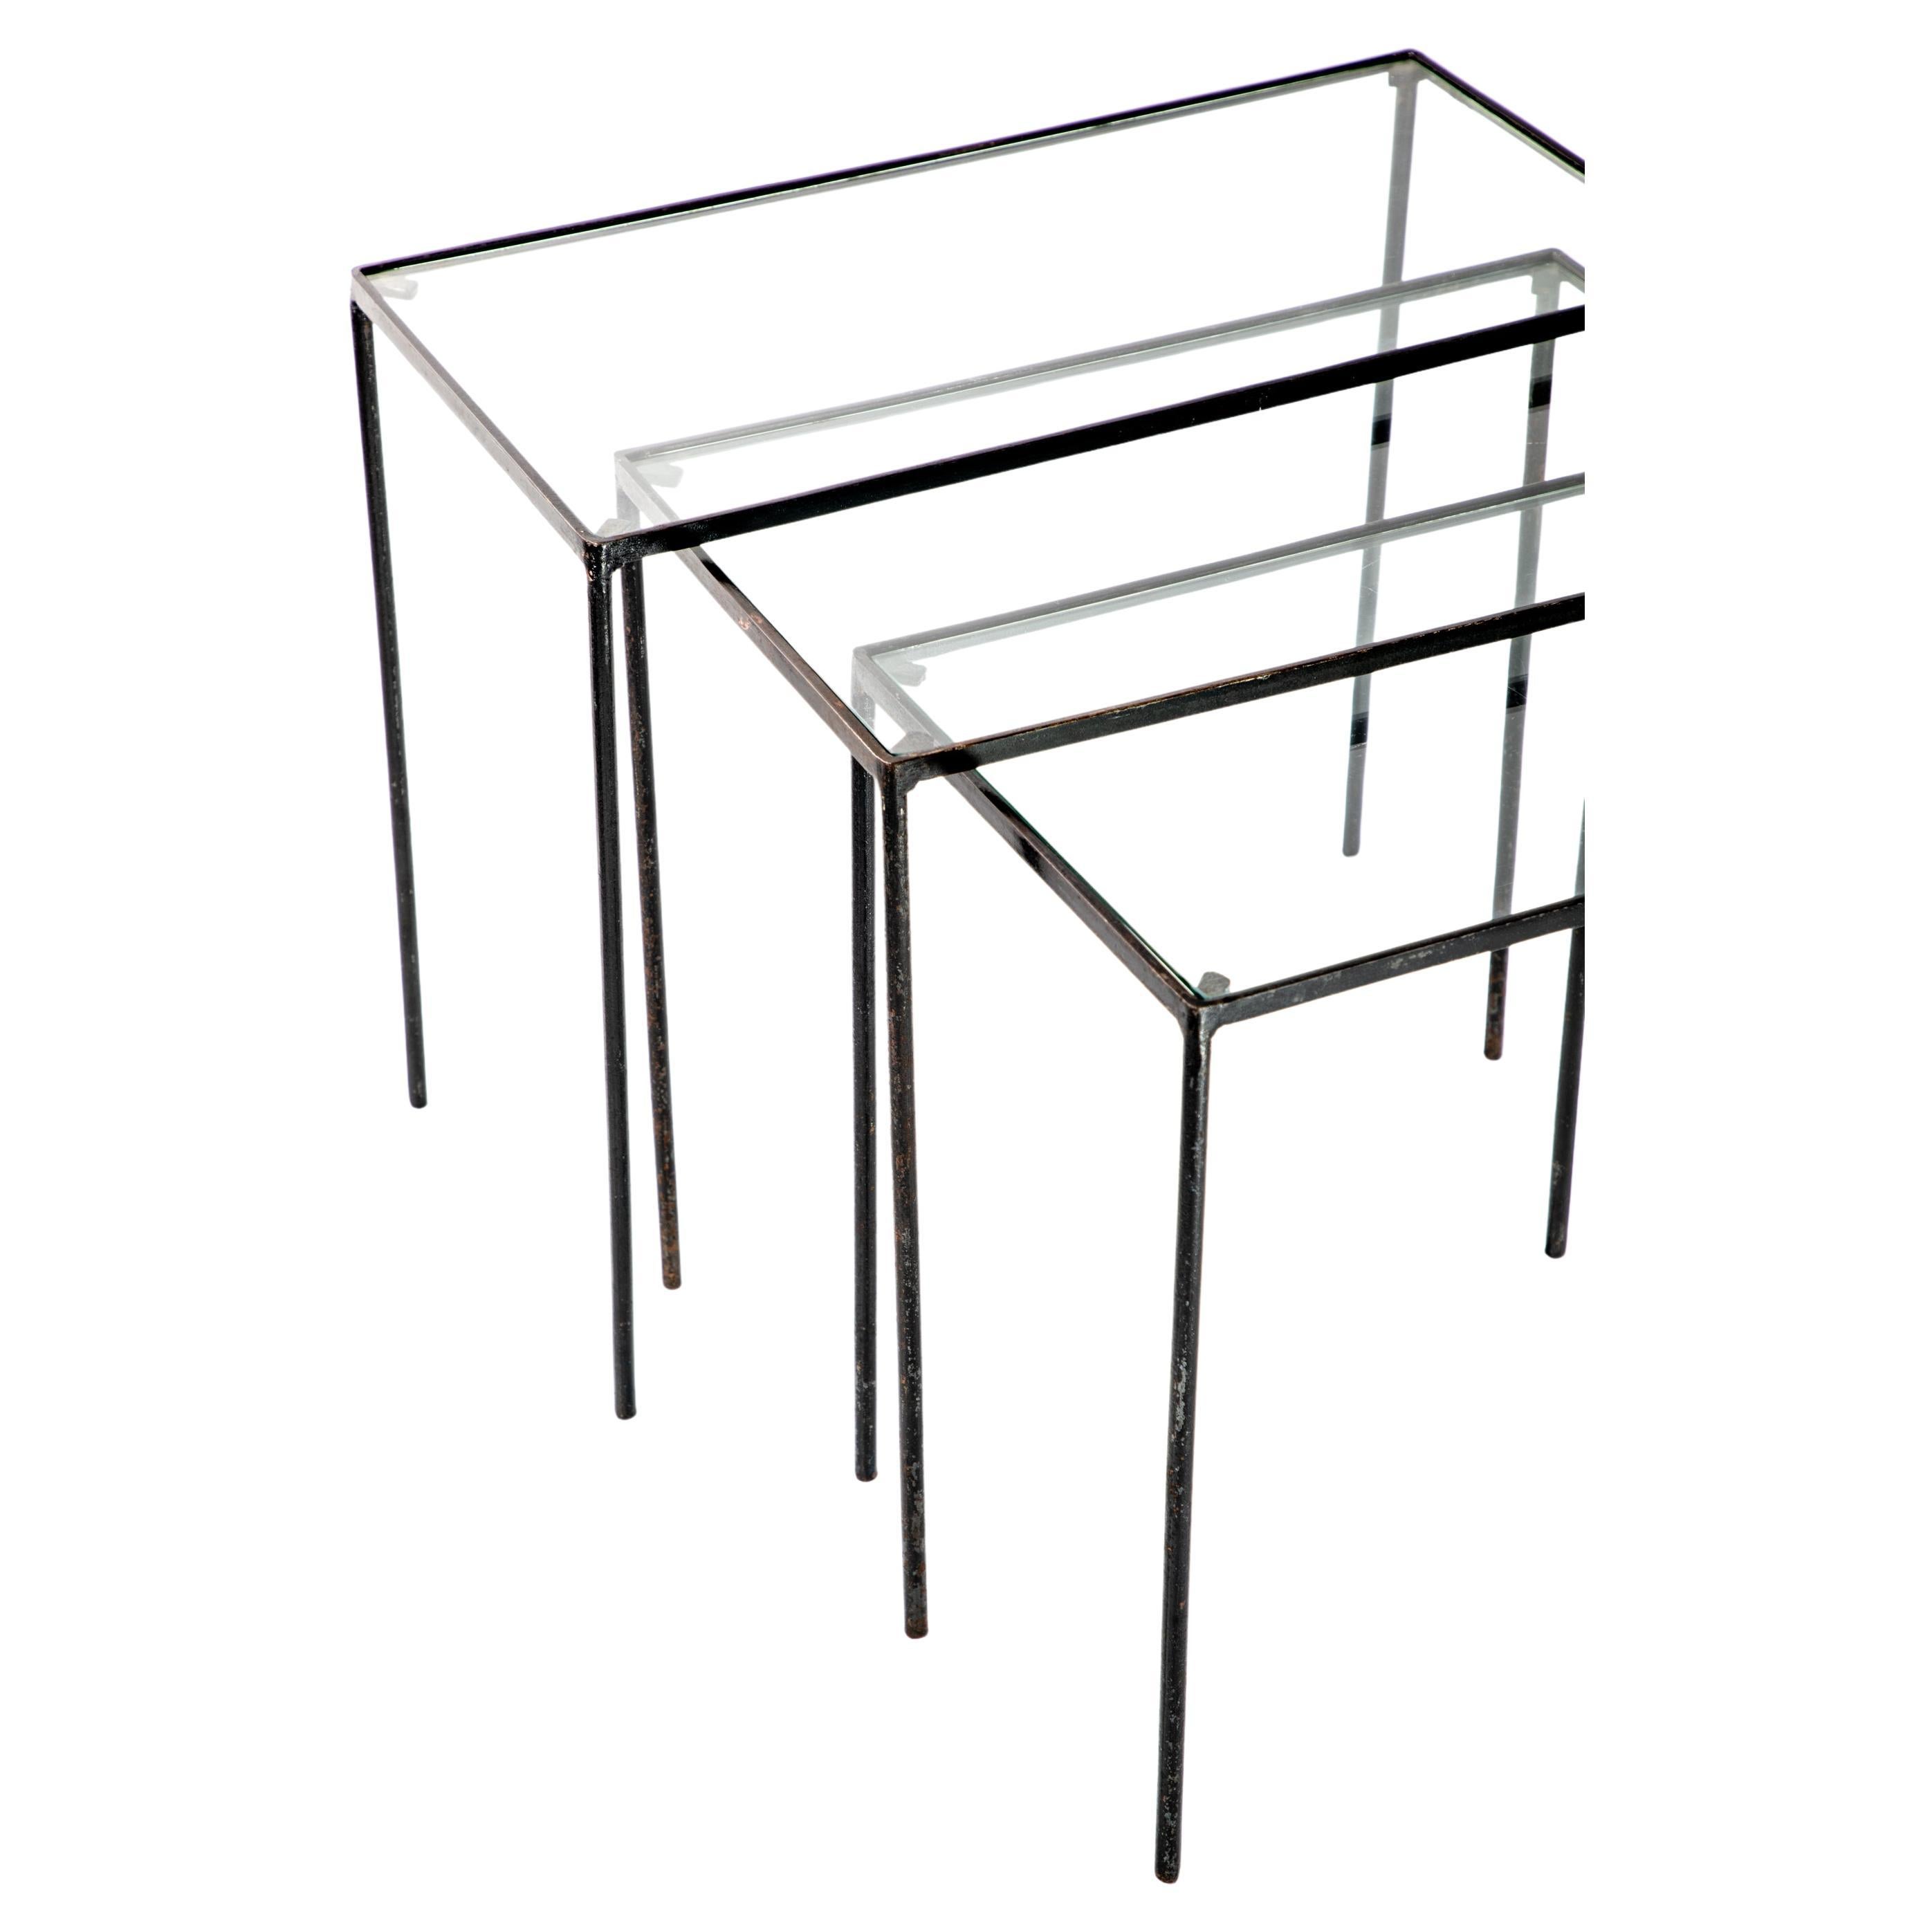 Set of three nesting tables in the manner of Jean-Michel Frank.  Iron and glass, round legs.  

Dimensions:
Lg table - 20